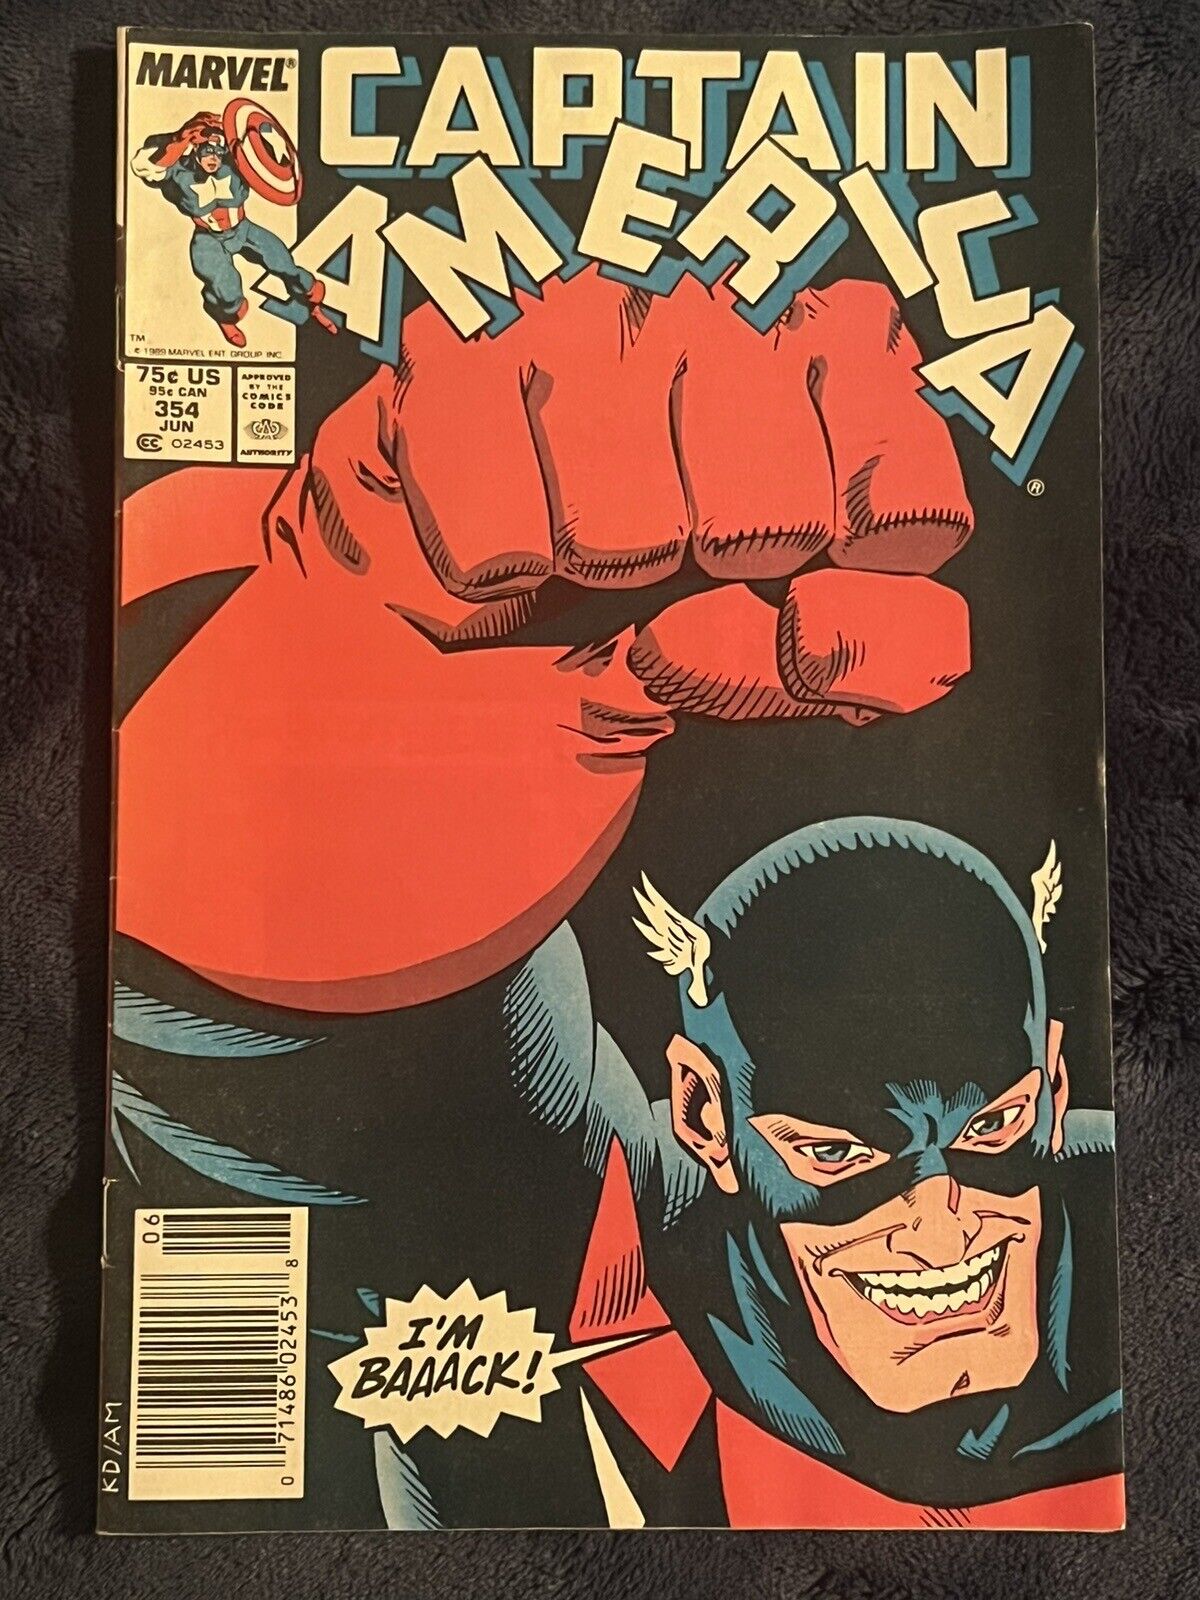 Captain America #354 (1989) First Appearance: US Agent, Iron Monger